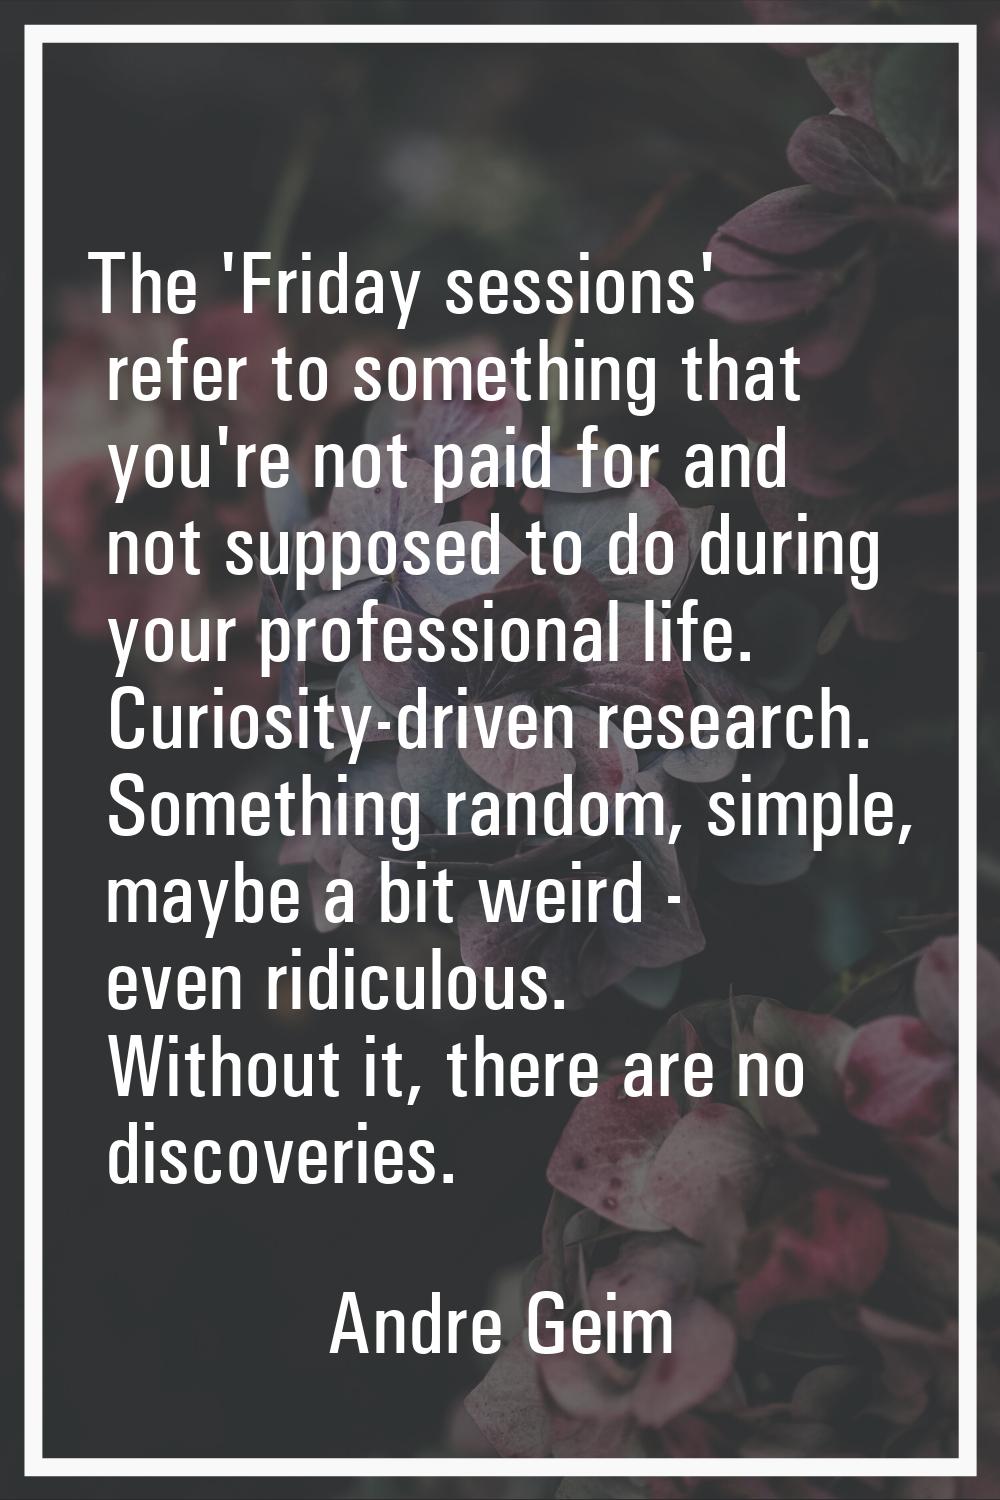 The 'Friday sessions' refer to something that you're not paid for and not supposed to do during you